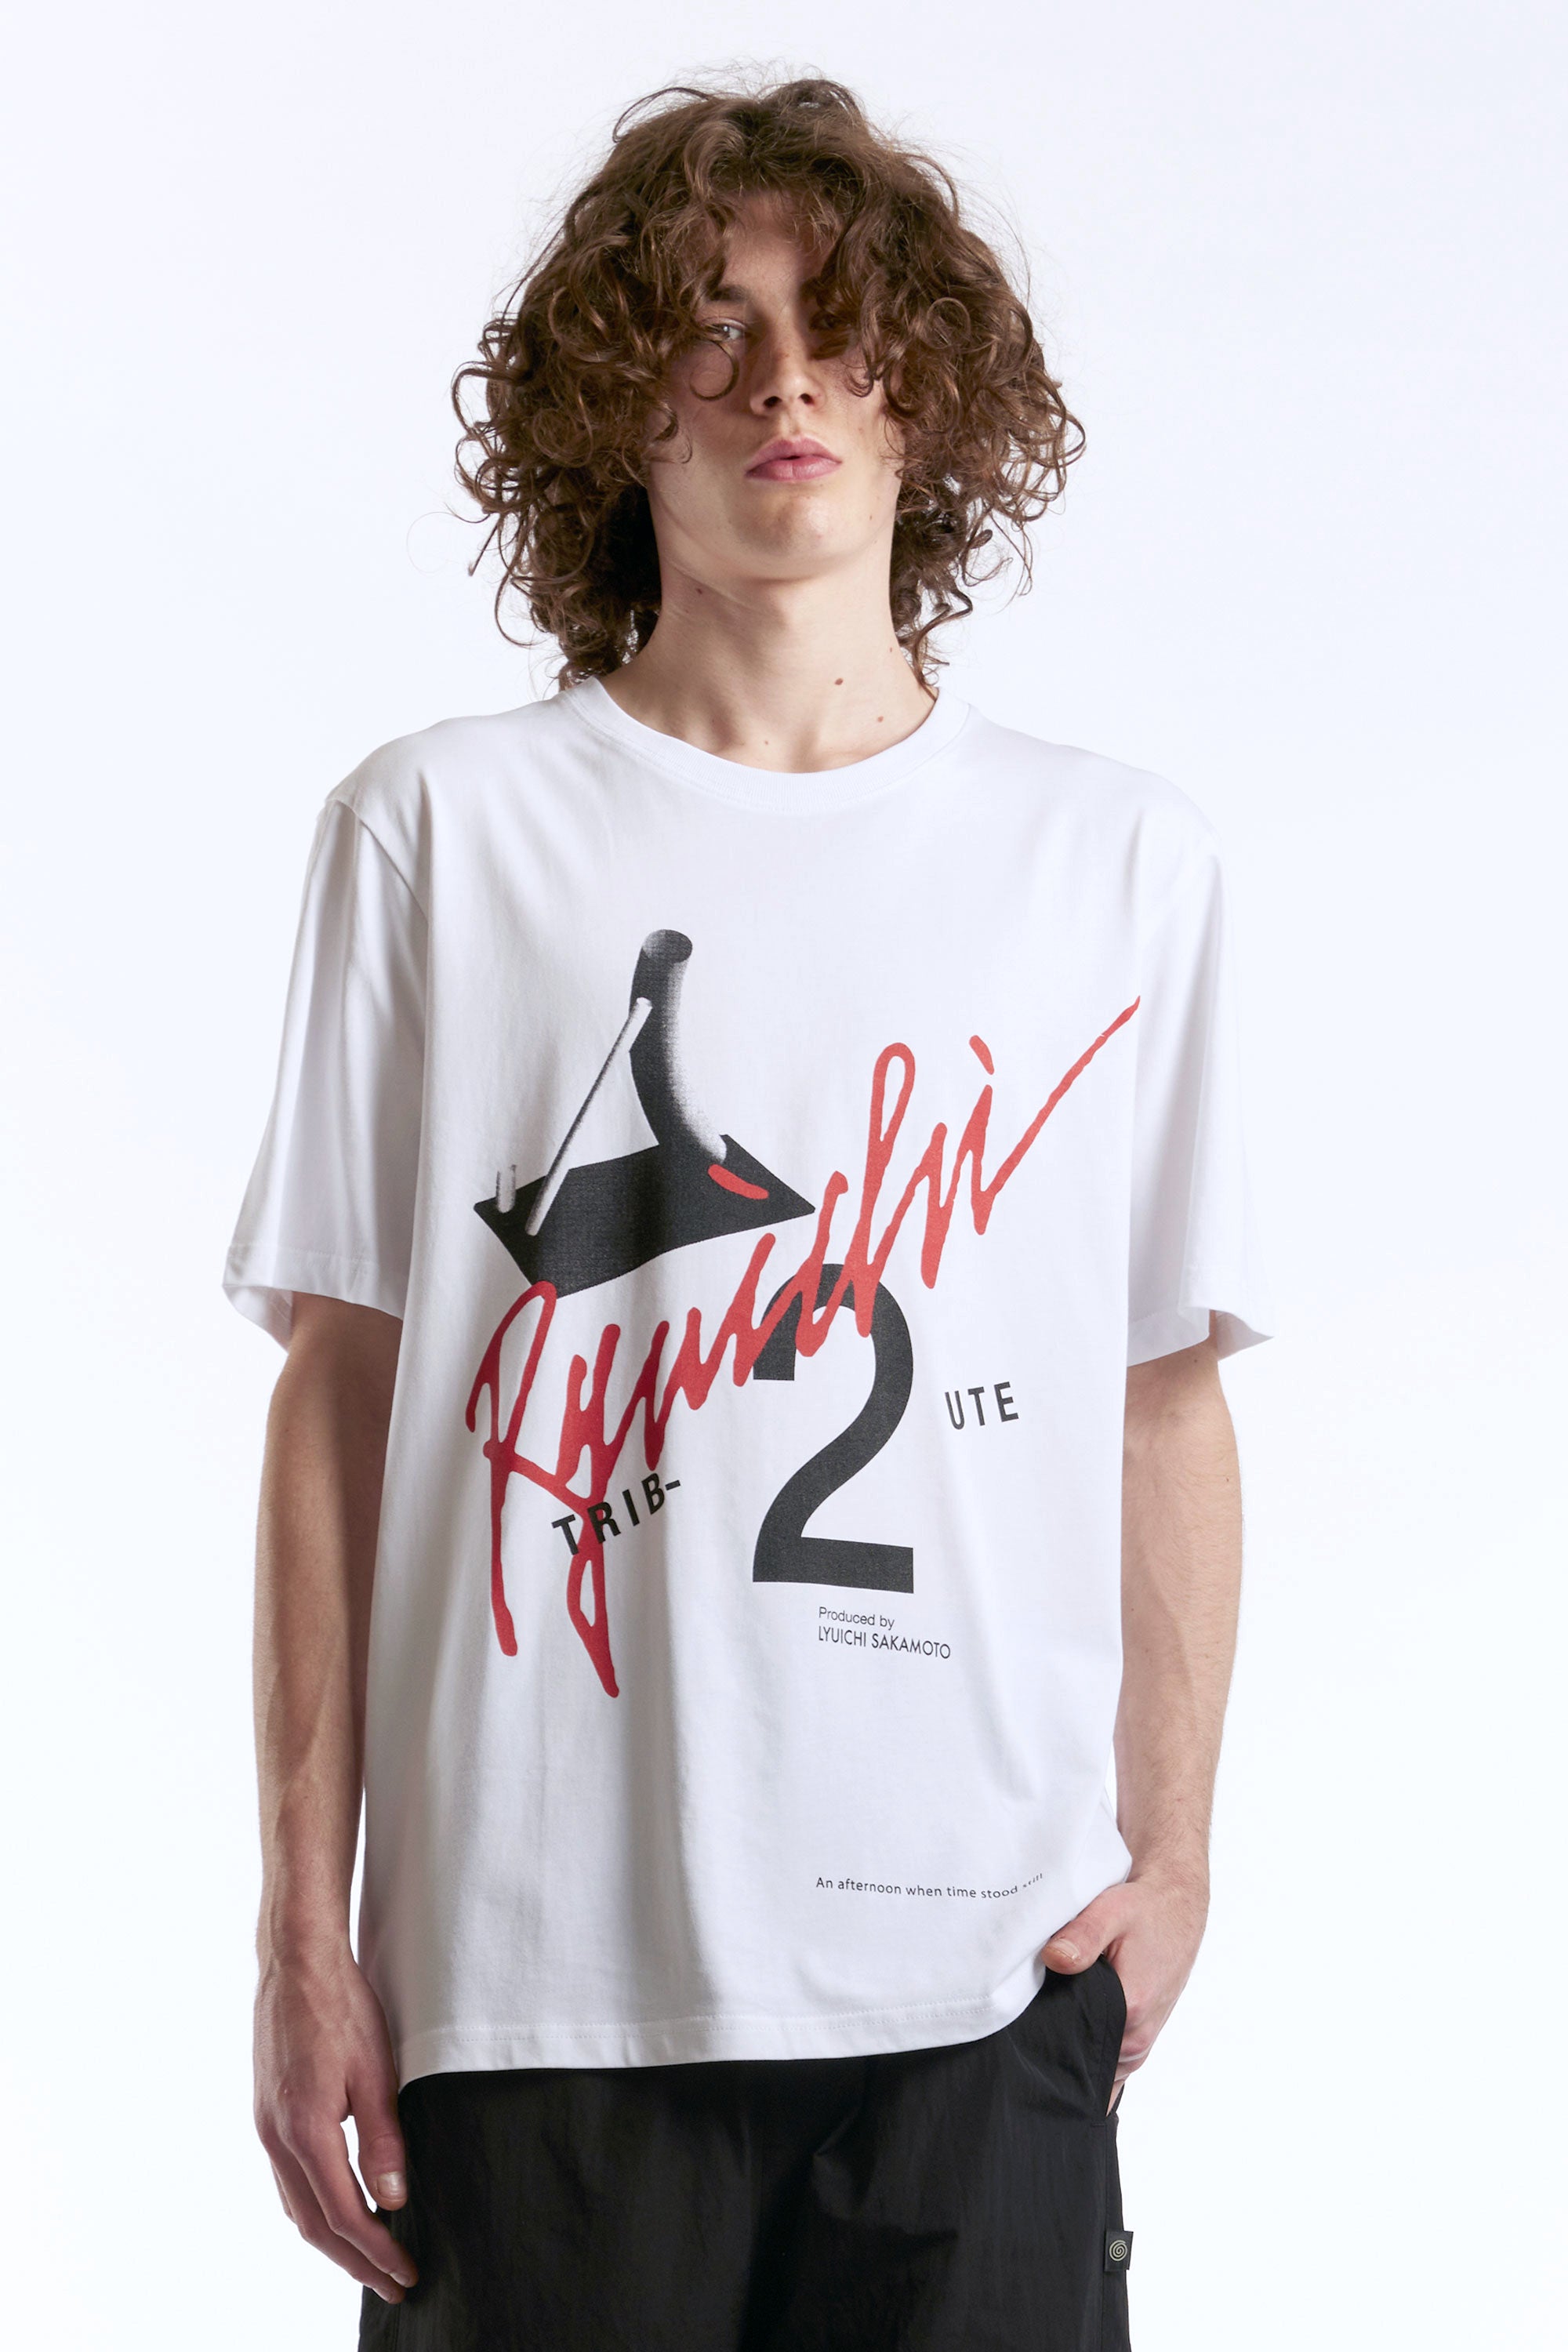 The PAMMIX029 - NERVES KNIVES TEE WHITE available online with global shipping, and in PAM Stores Melbourne and Sydney.